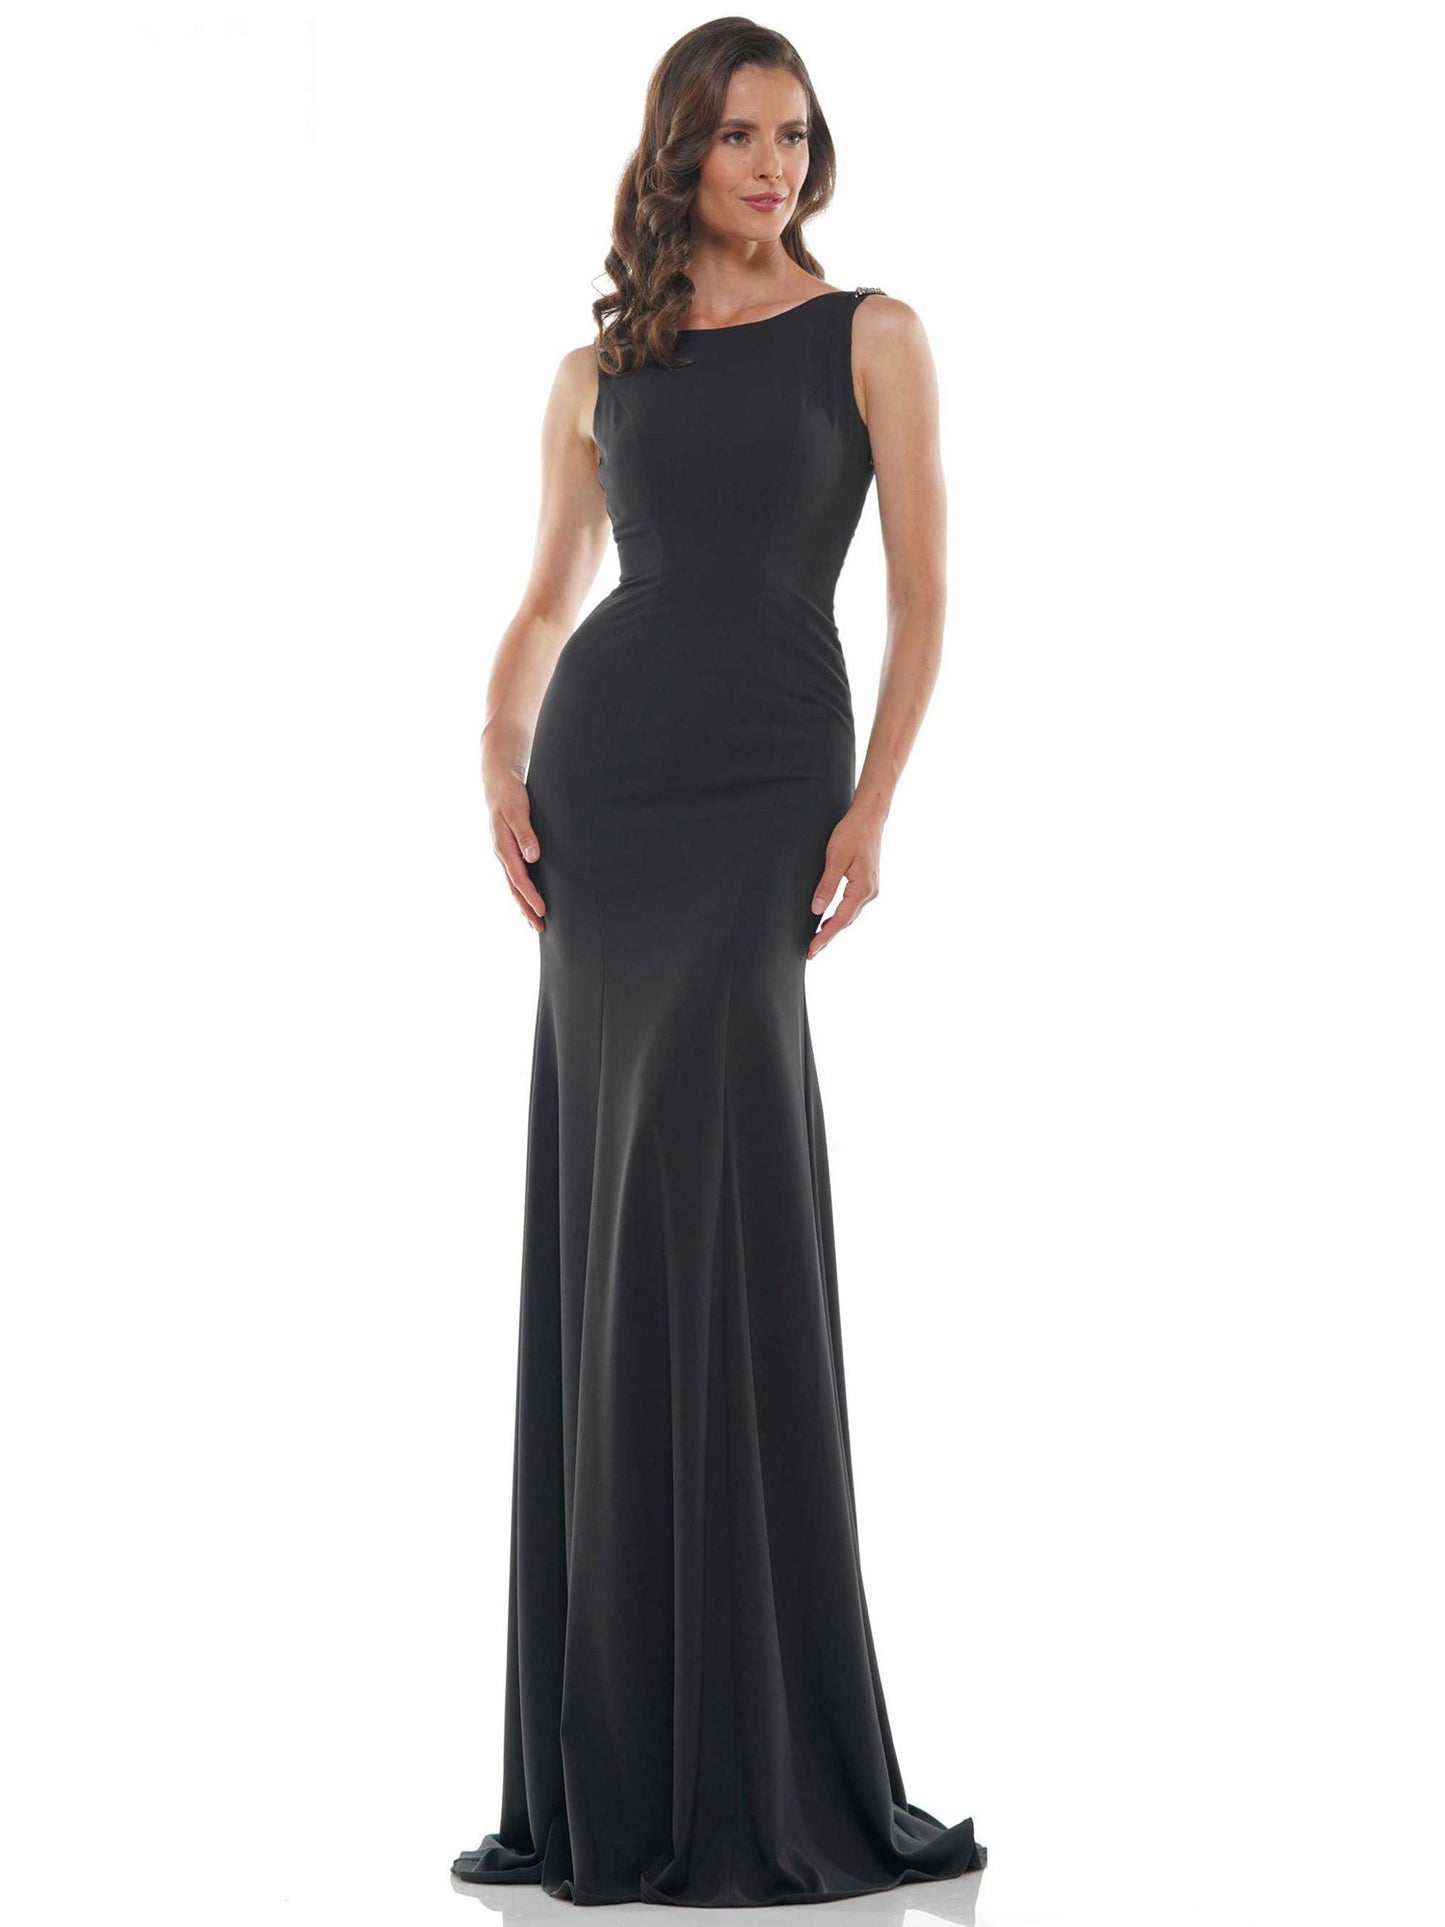 Marsoni by Colors Scoop Neck with Beaded Embellishment Evening Dress M140